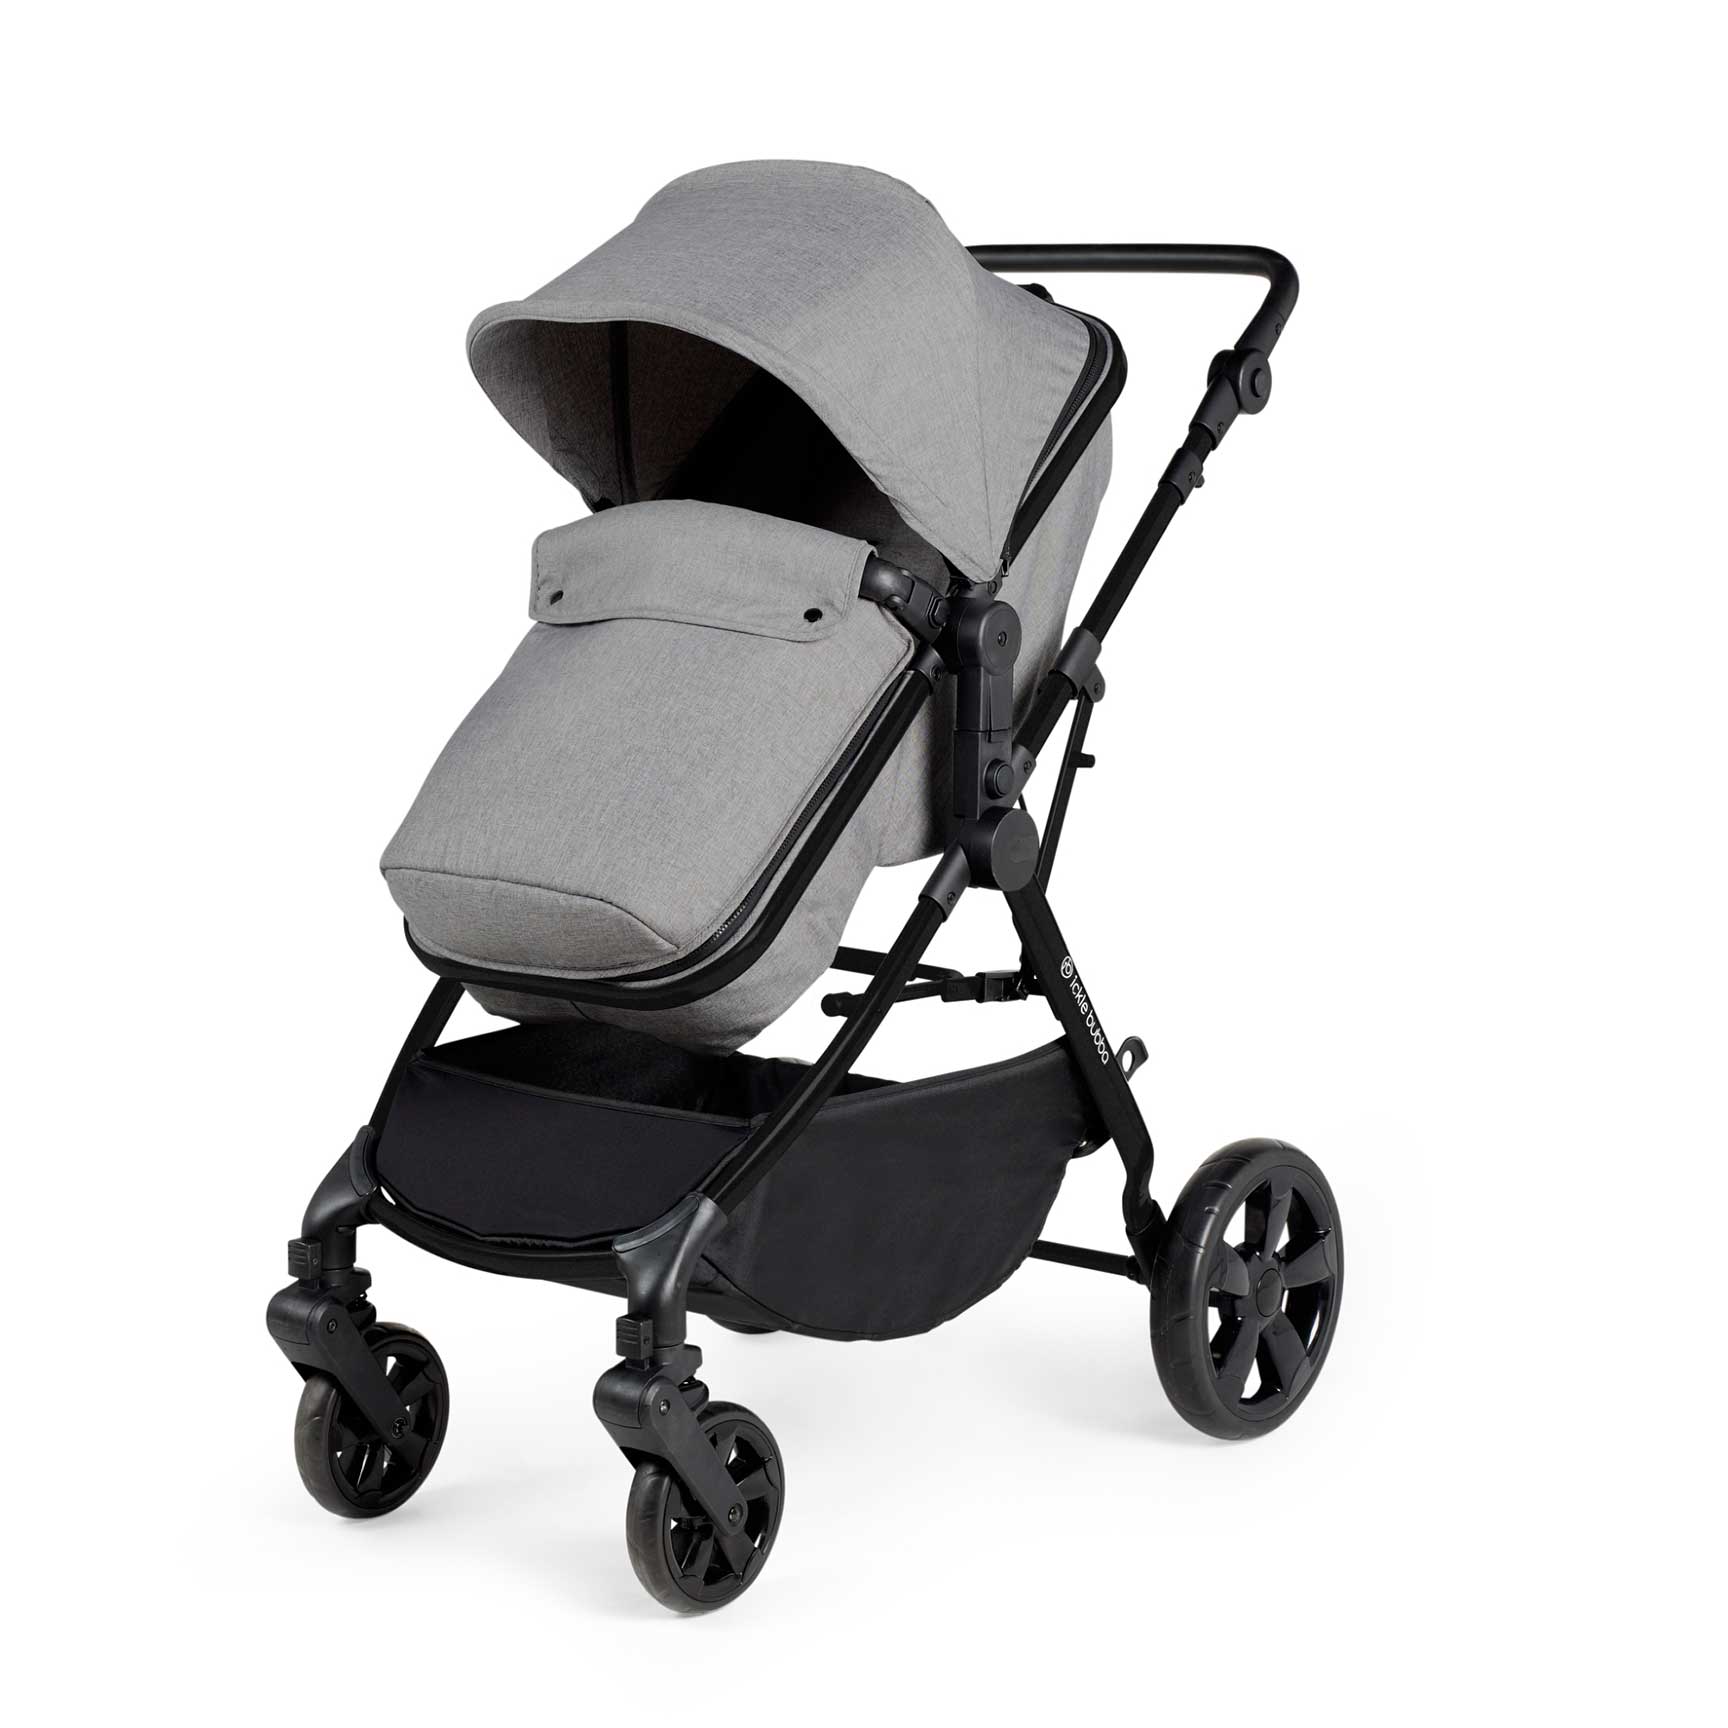 Ickle Bubba Comet All-in-One I-Size Travel System with Isofix Base in Space Grey Baby Prams 10-008-300-014 5056515025804